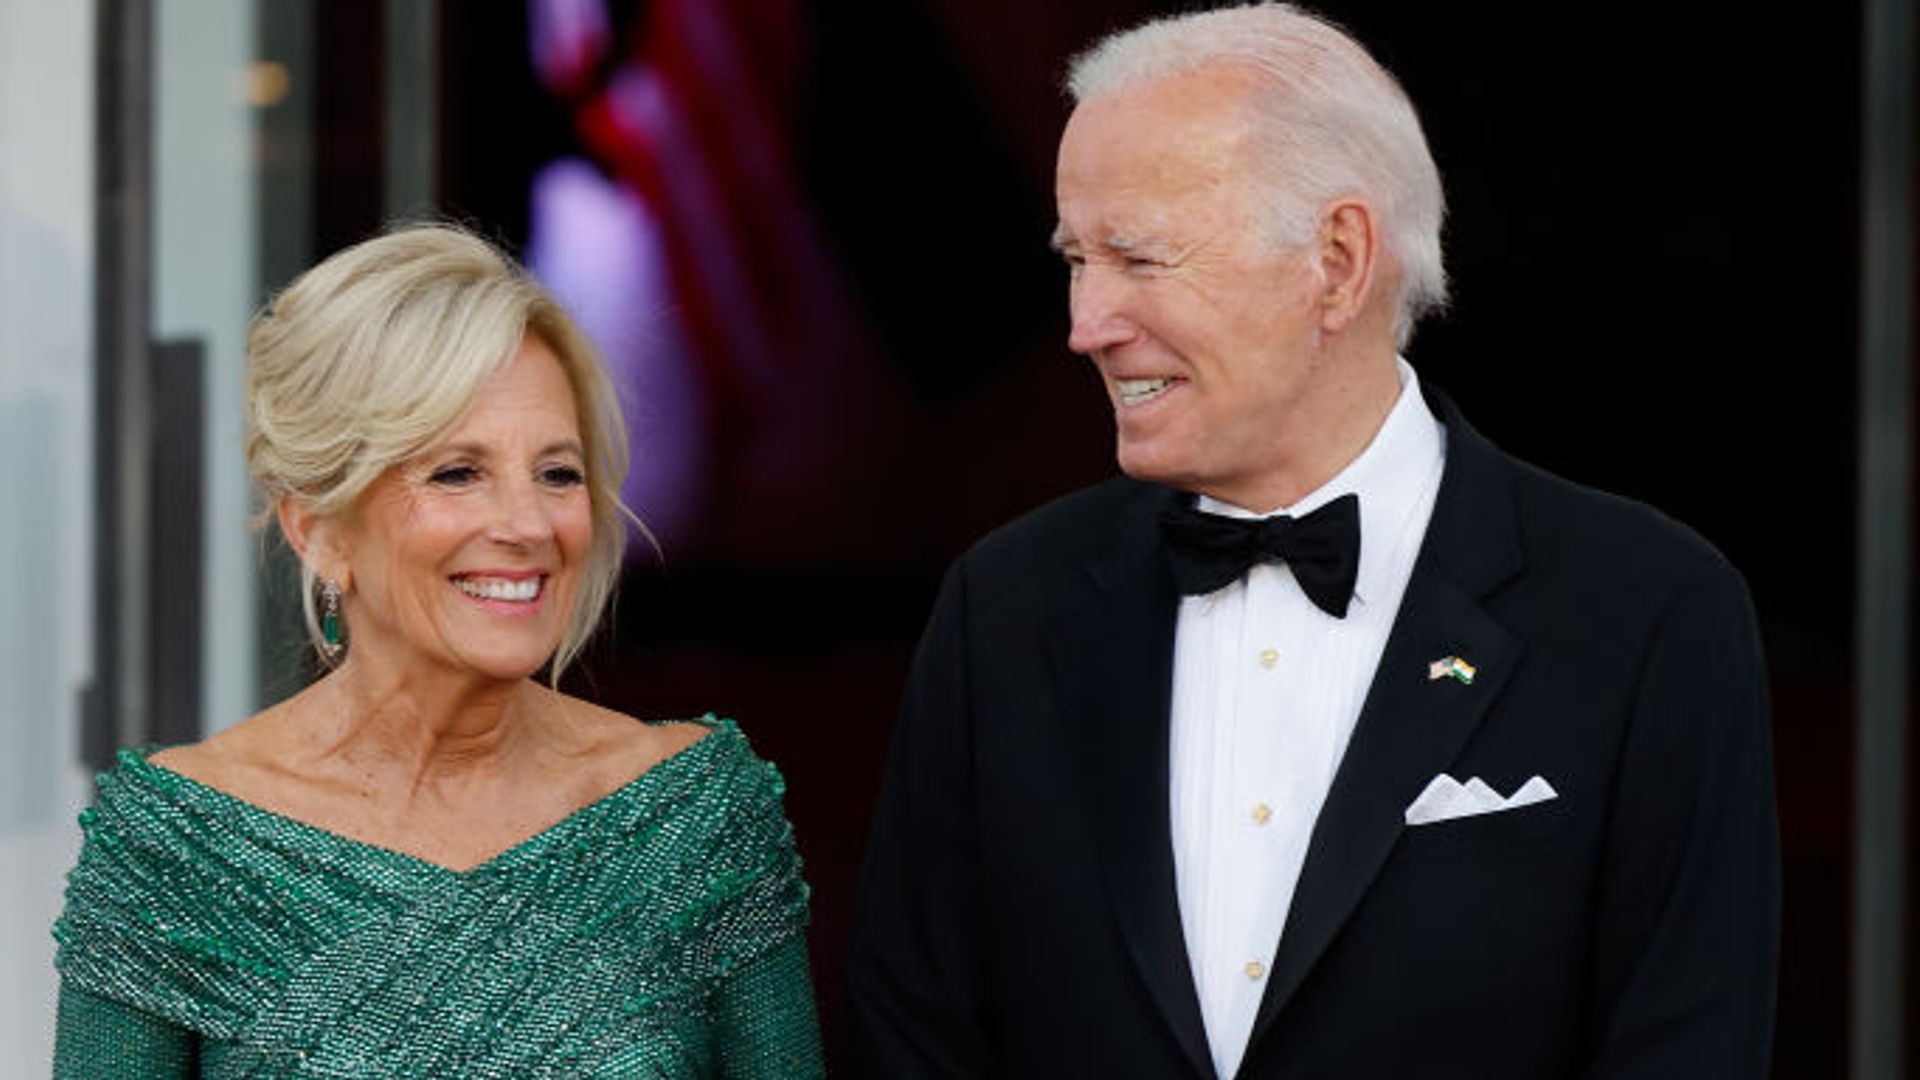 Who is Joe Biden's wife Jill Biden? Everything you need to know